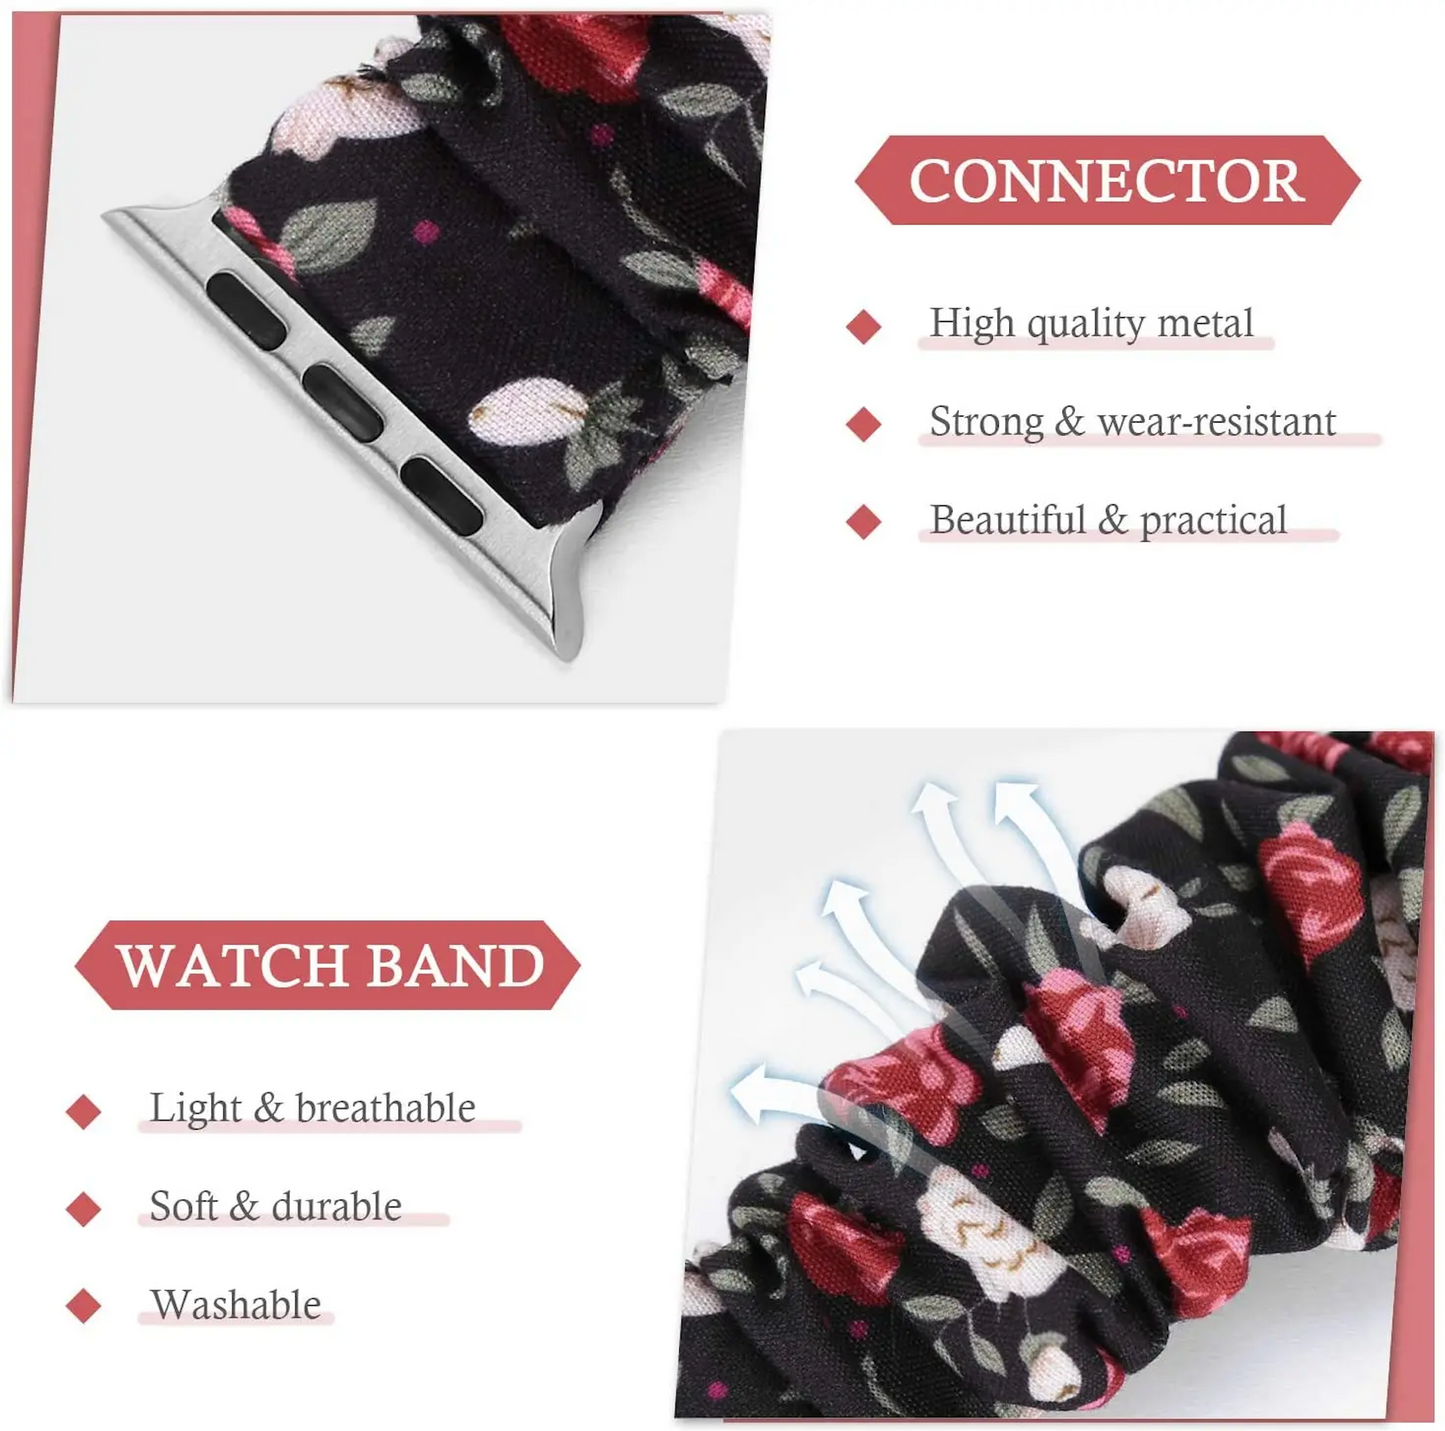 Scrunchie Strap for Apple Watch Red Floral